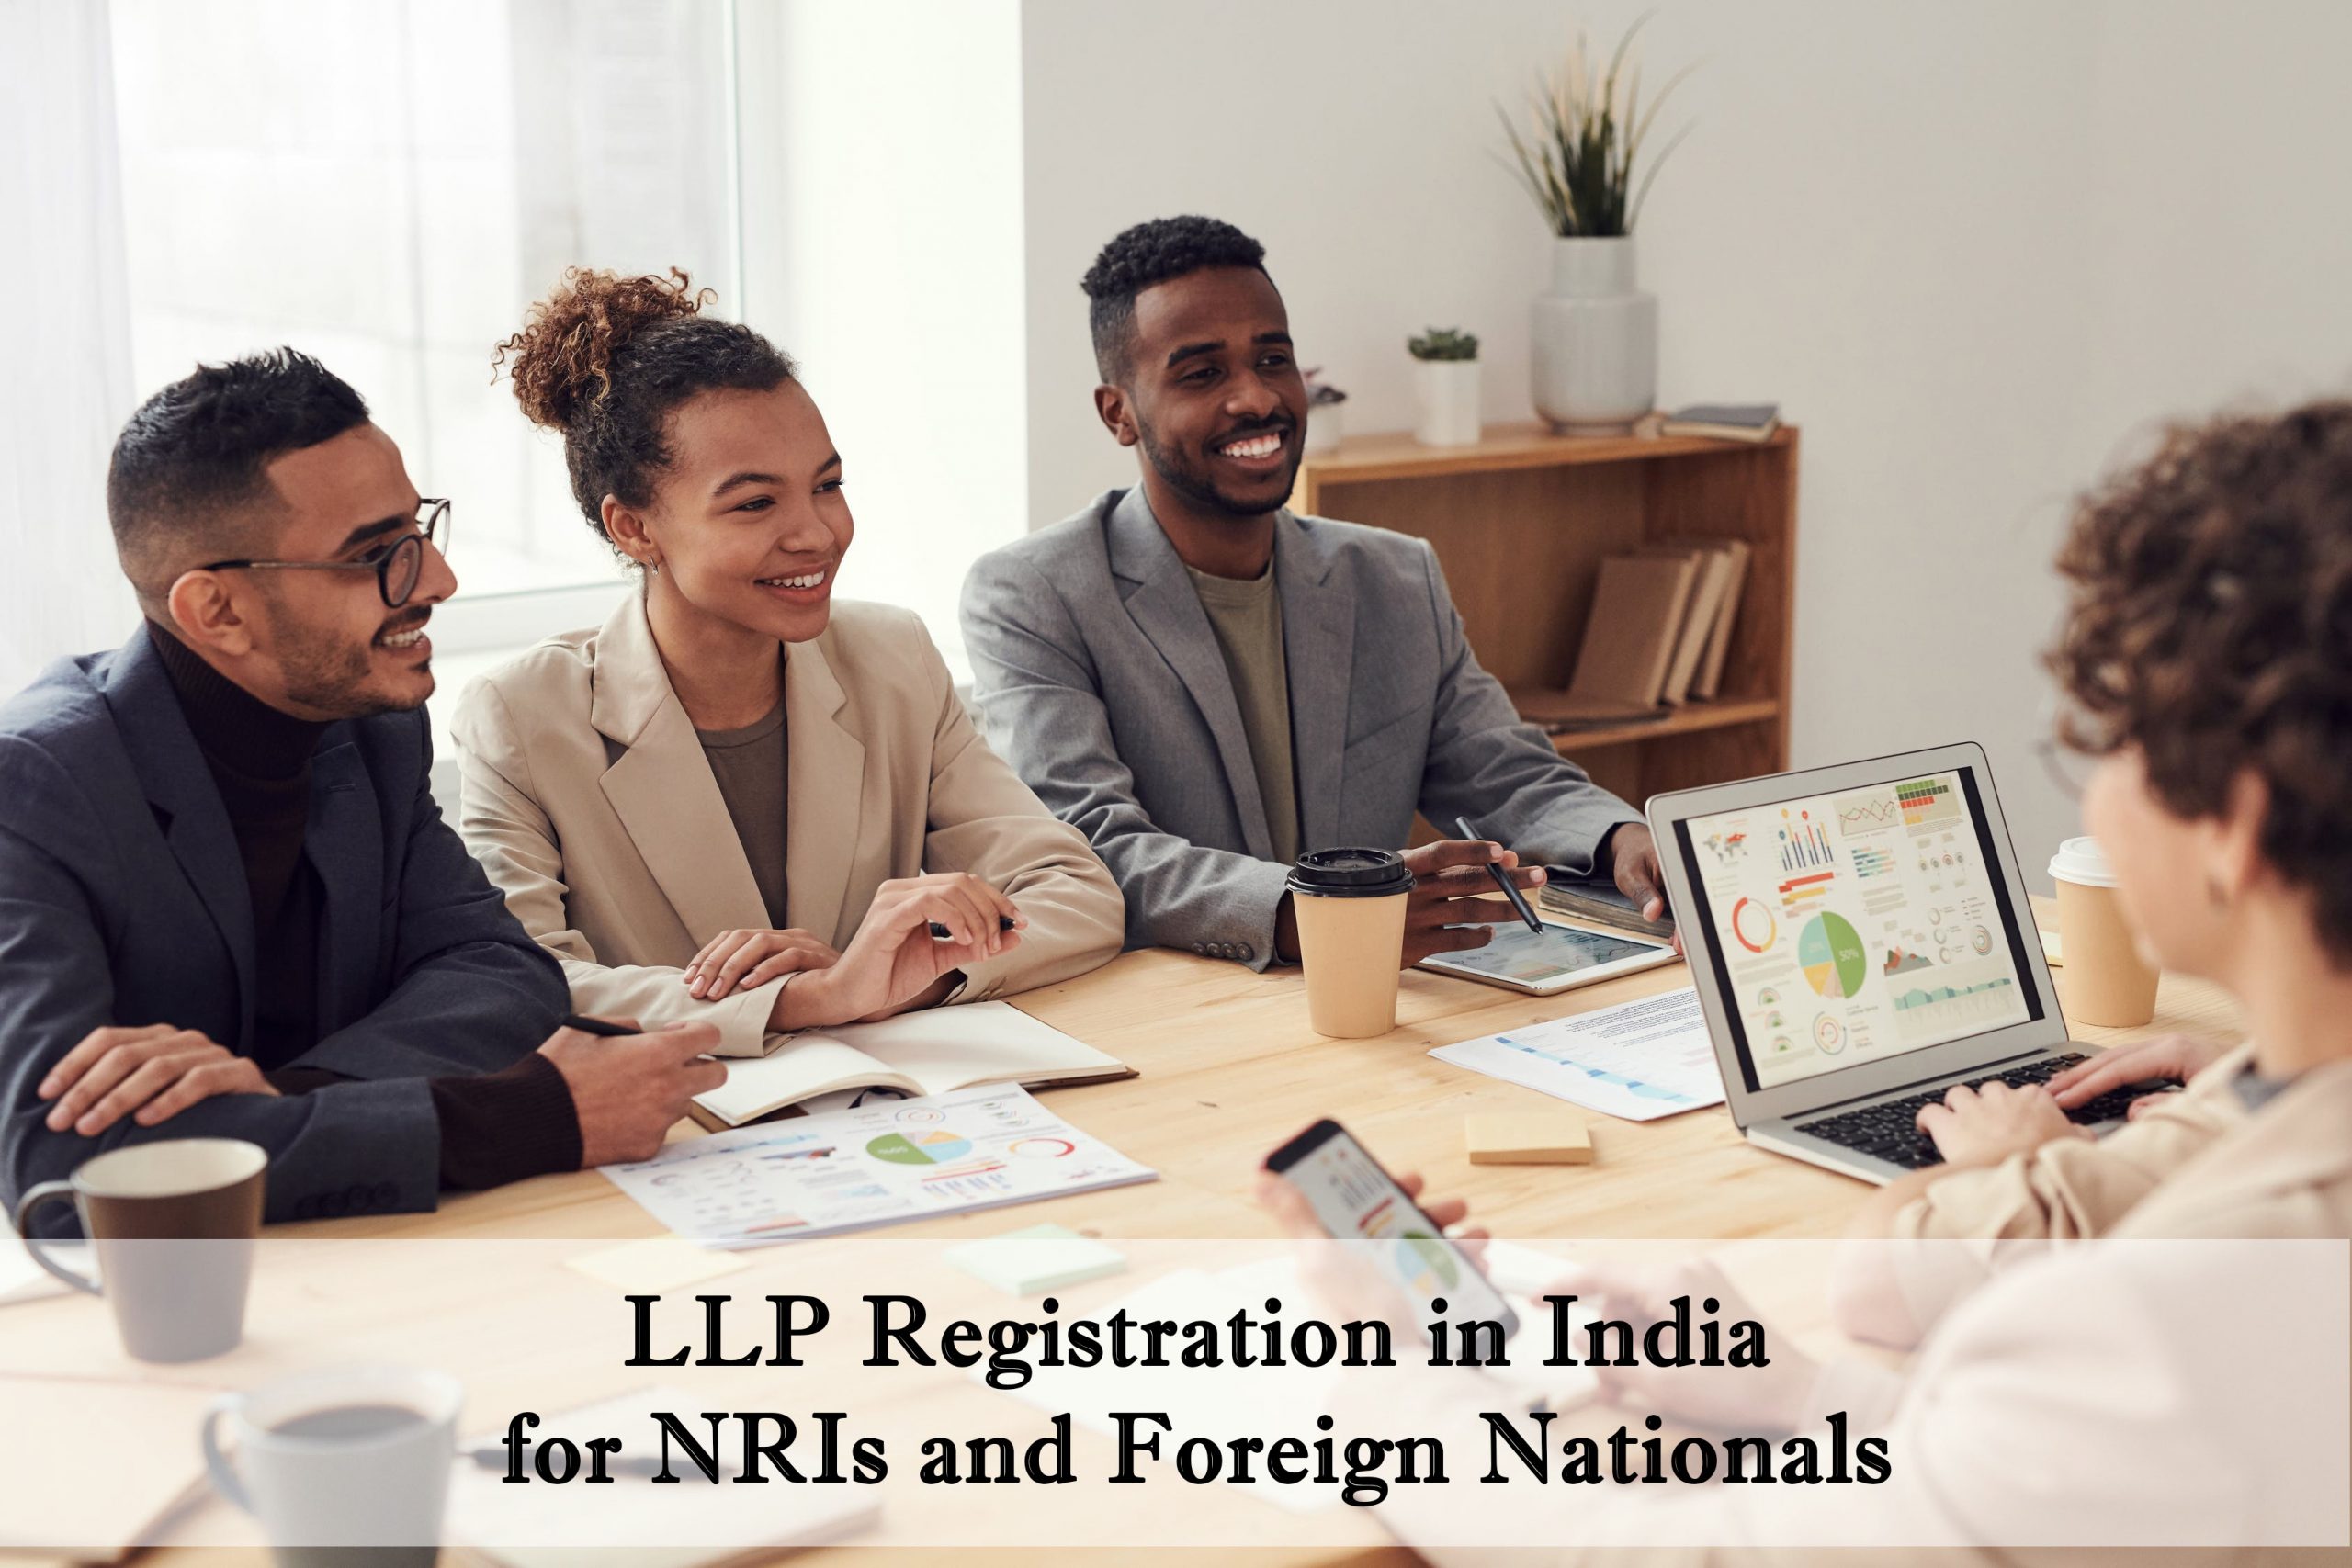 llp registration in India